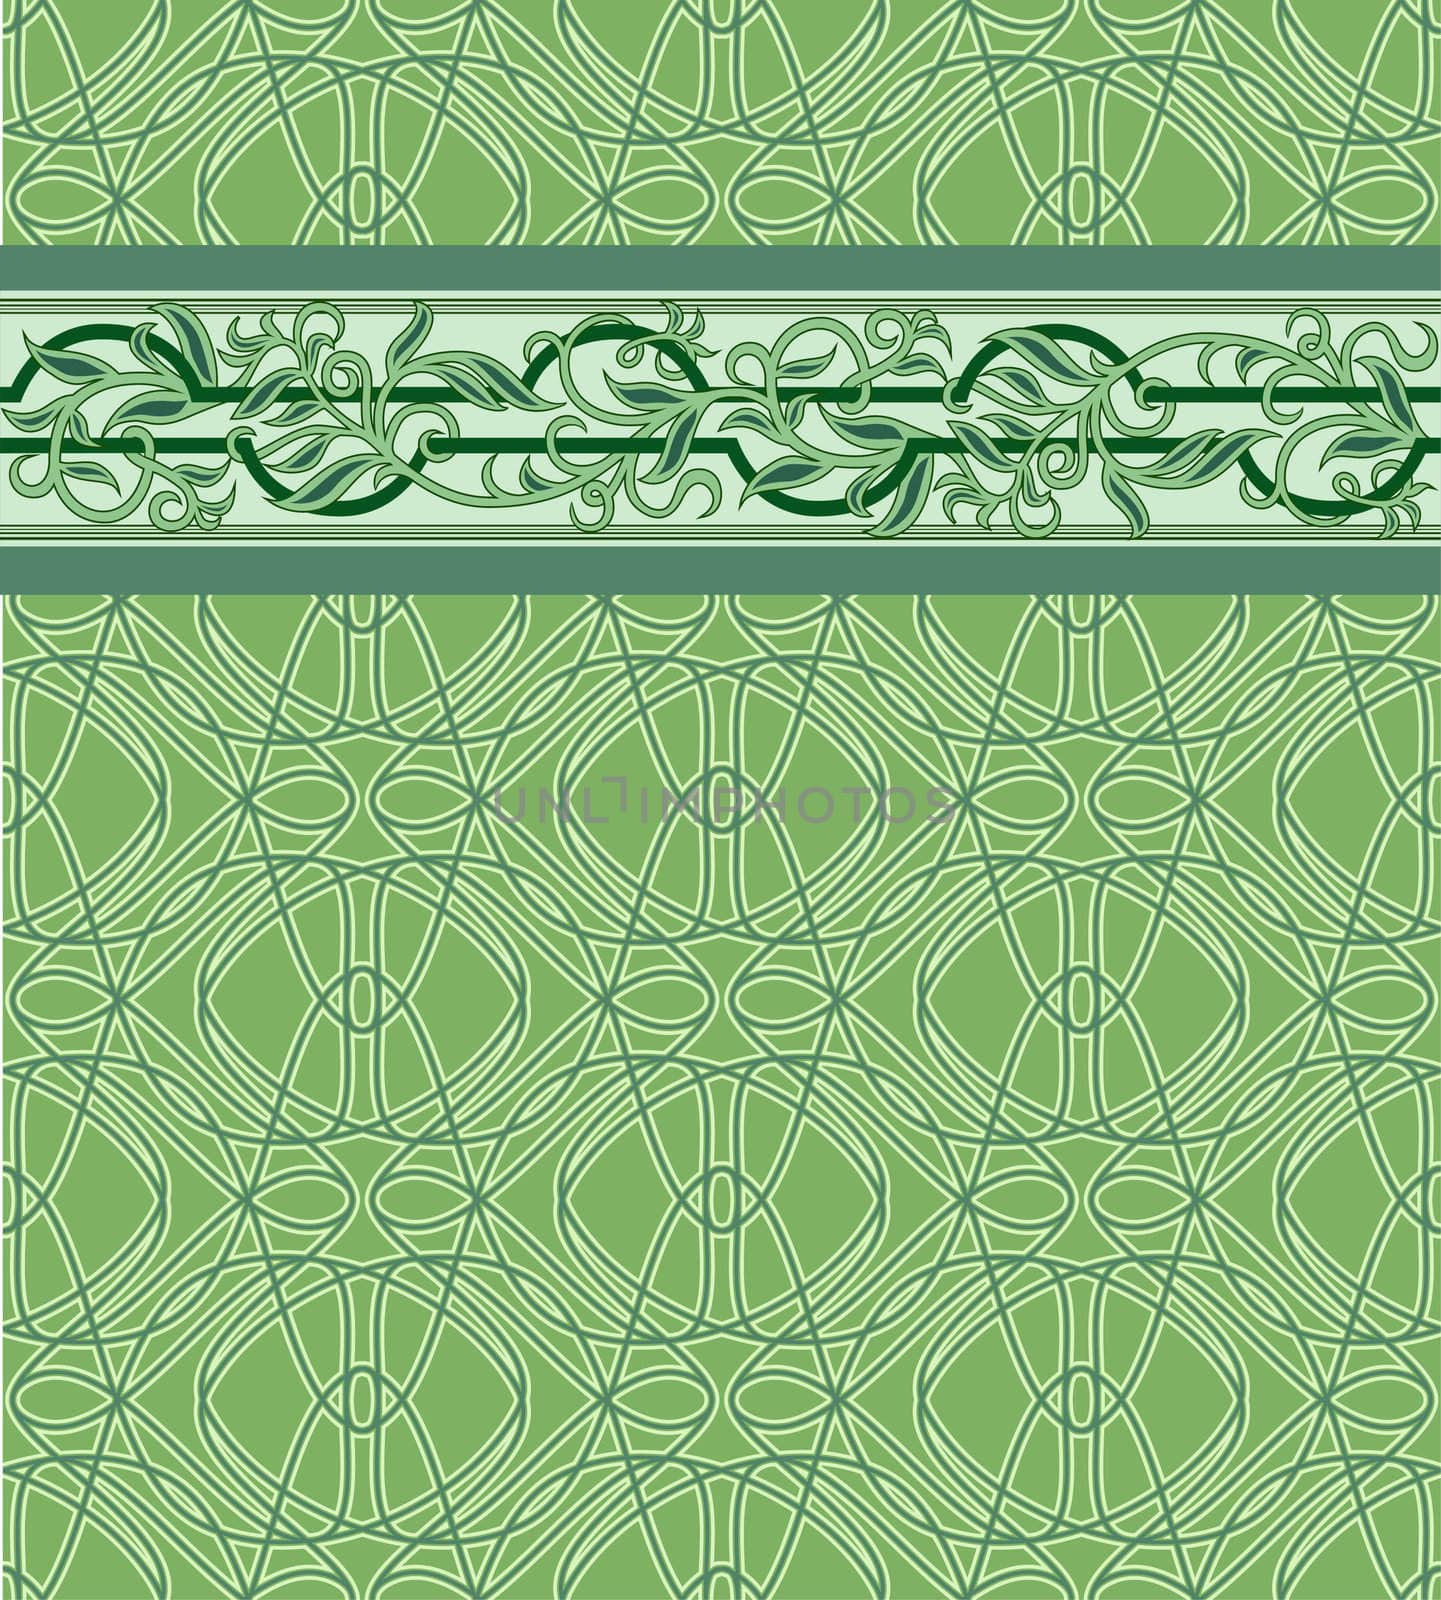 Seamless pattern for a fabric, papers, tiles with a decorative border